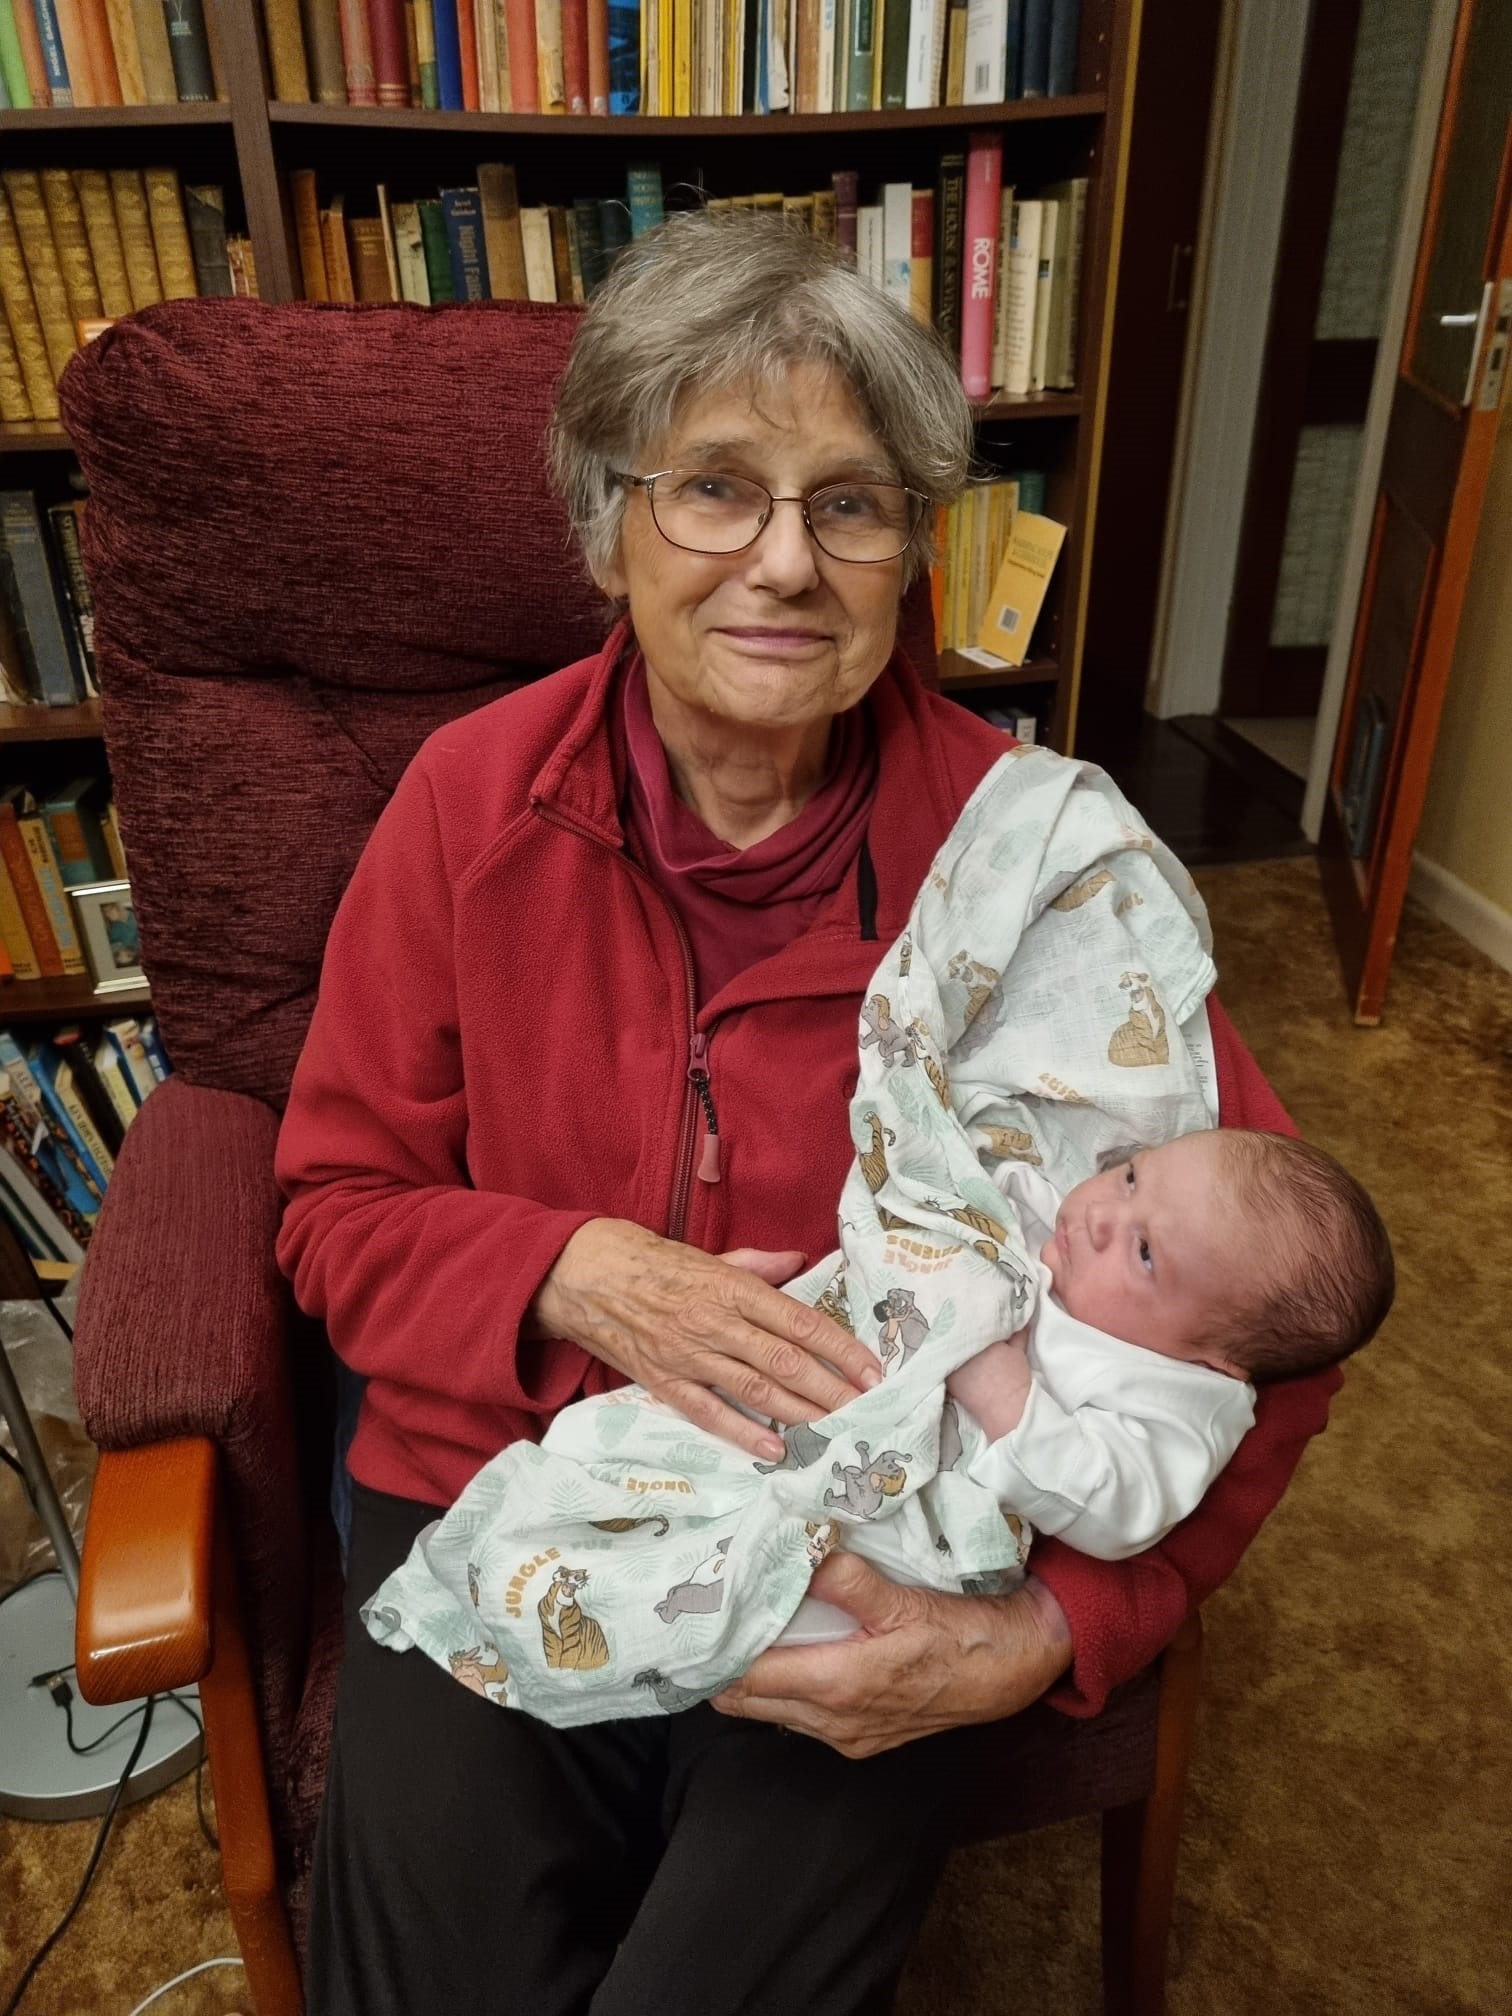 Vicki Matthew, pictured with her new great-grandson earlier this year, died aged 77